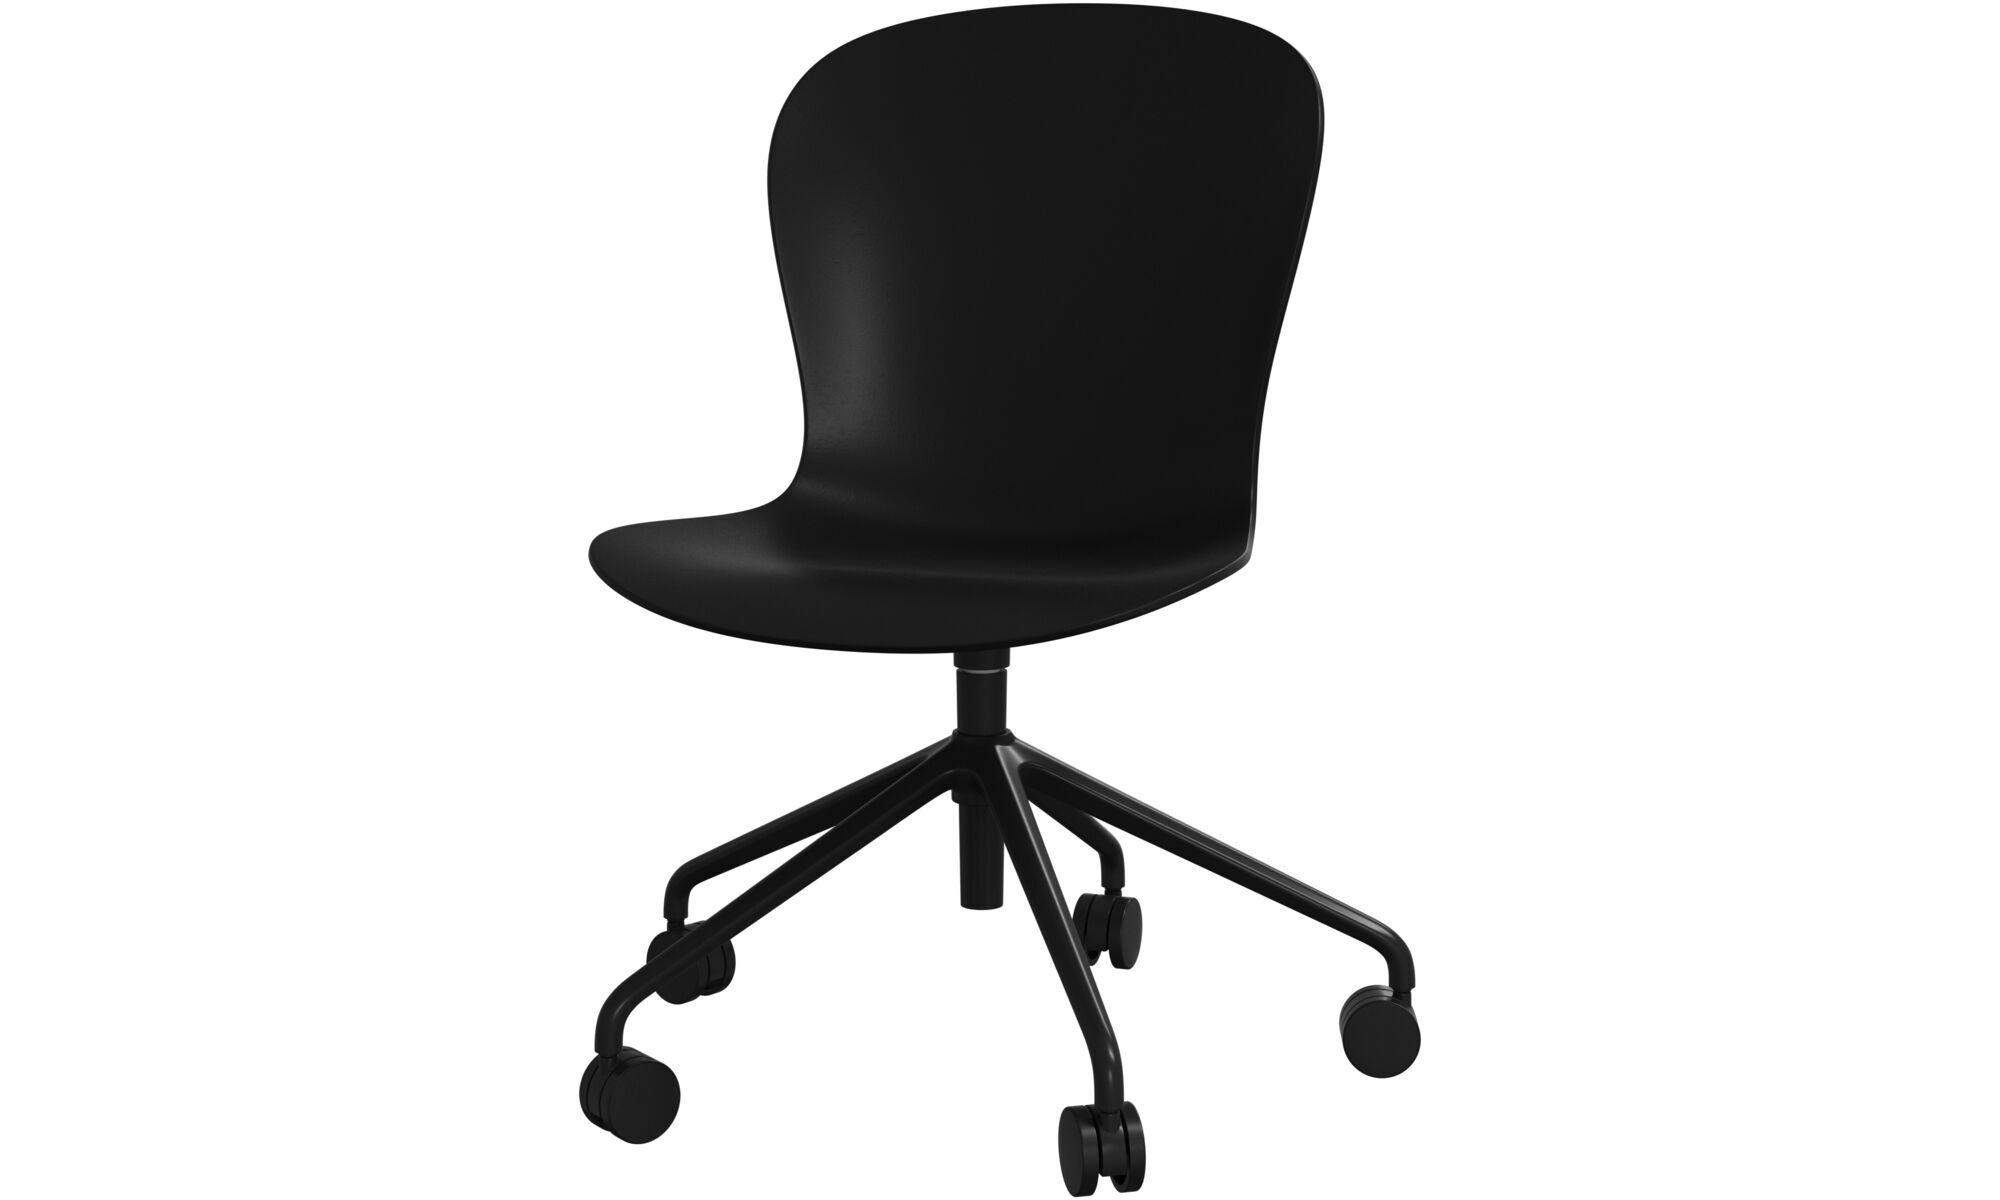 ADELAIDE OFFICE CHAIR